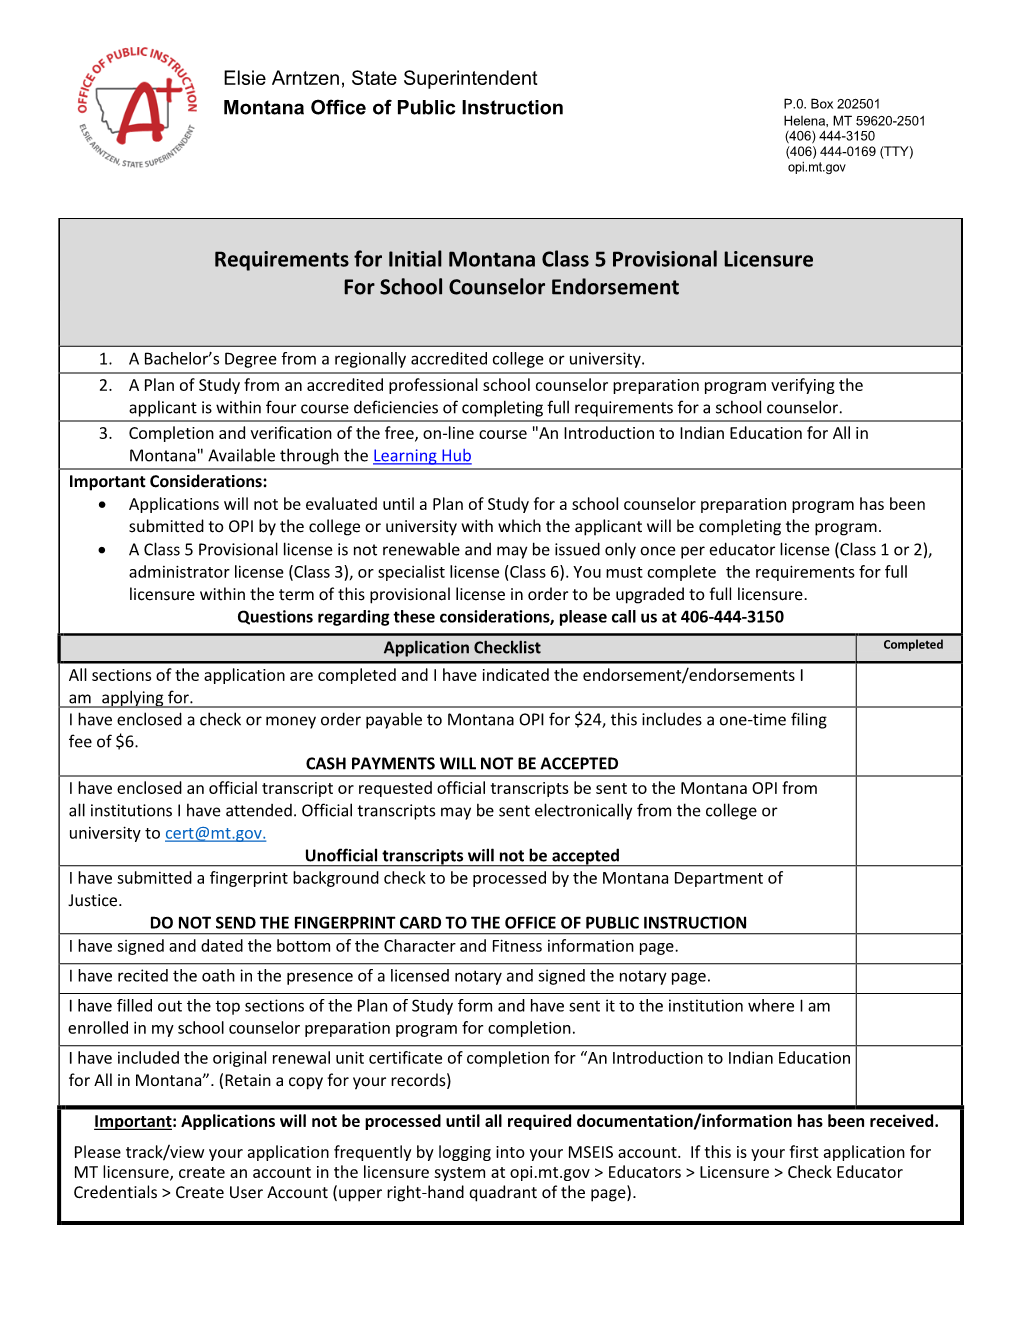 Requirements for Initial Montana Class 5 Provisional Licensure for School Counselor Endorsement